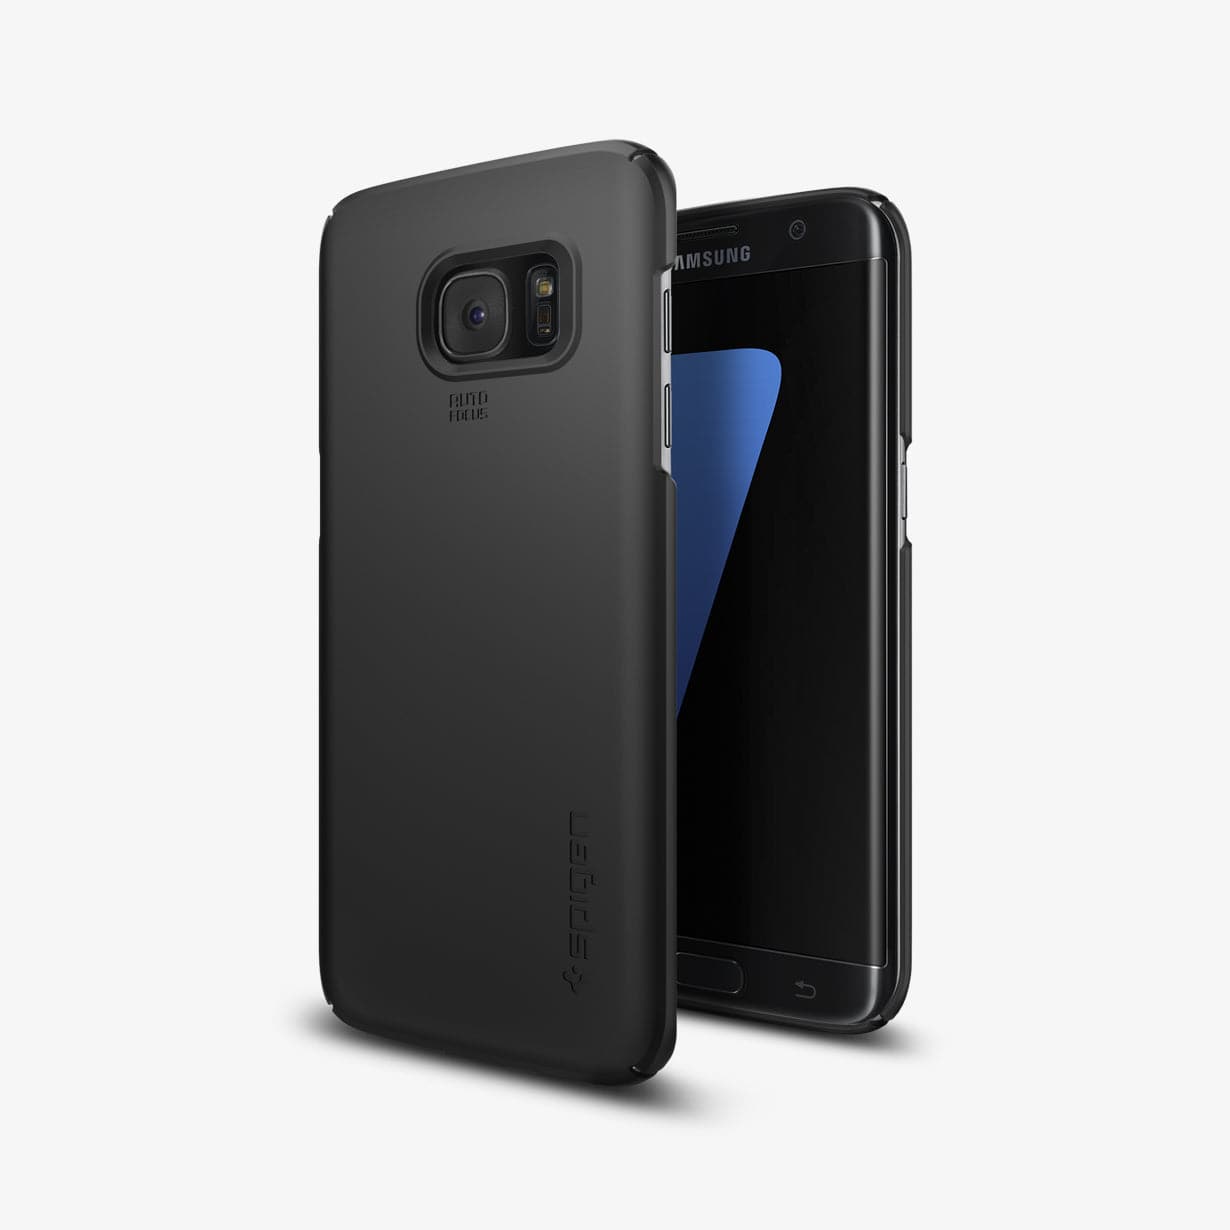 556CS20029 - Galaxy S7 Series Thin Fit Case in black showing the back and front